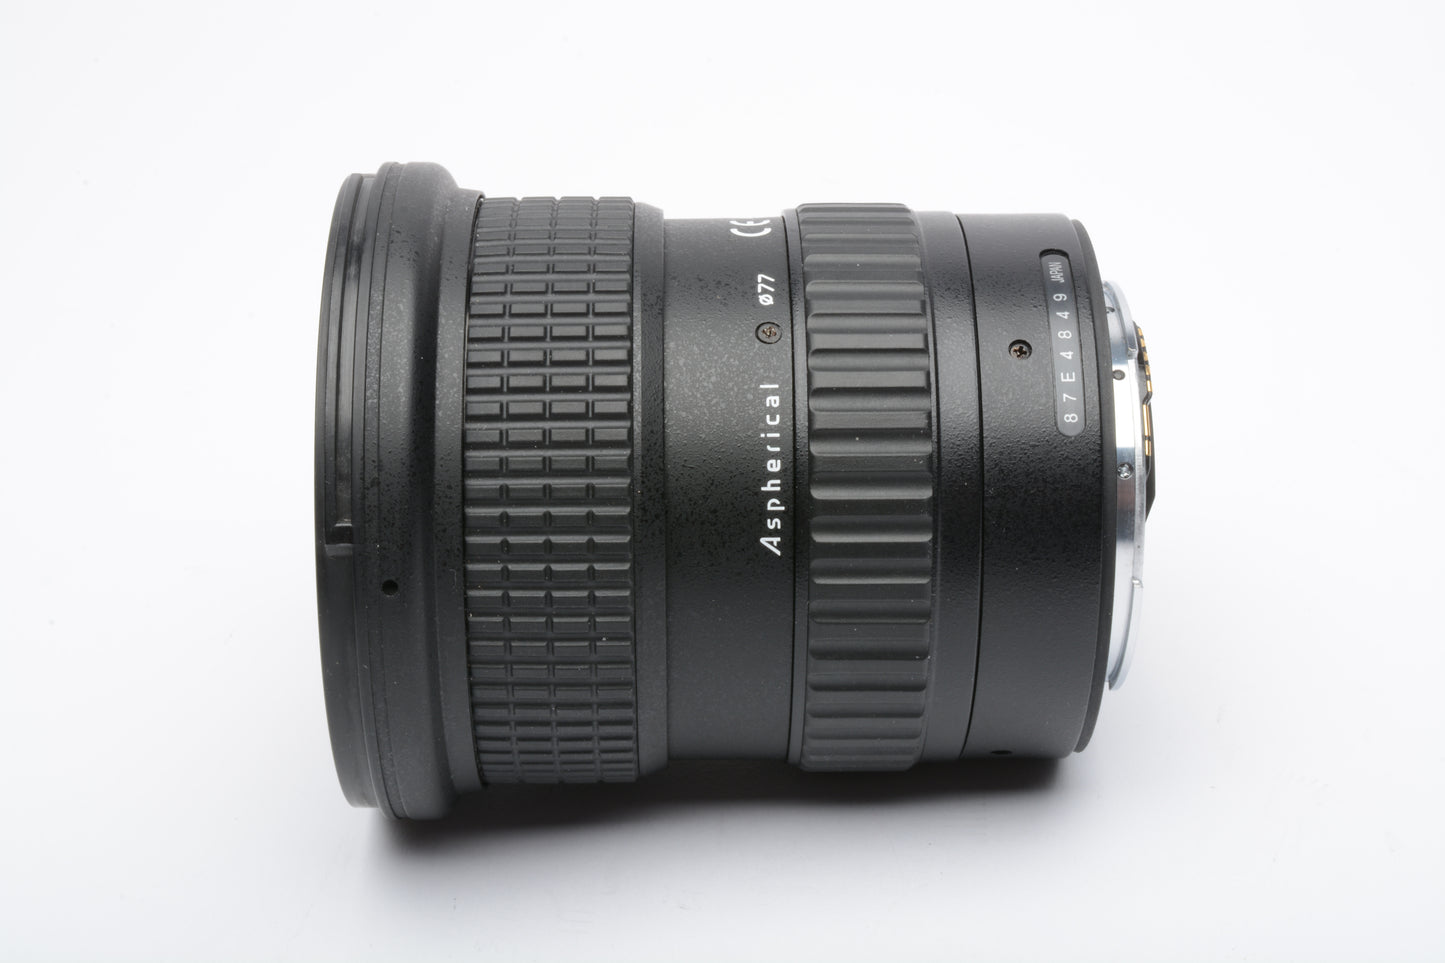 Tokina SD 11-16mm f2.8 IF DX II AT-X Pro lens for Canon EF, UV, Hood, Mint-